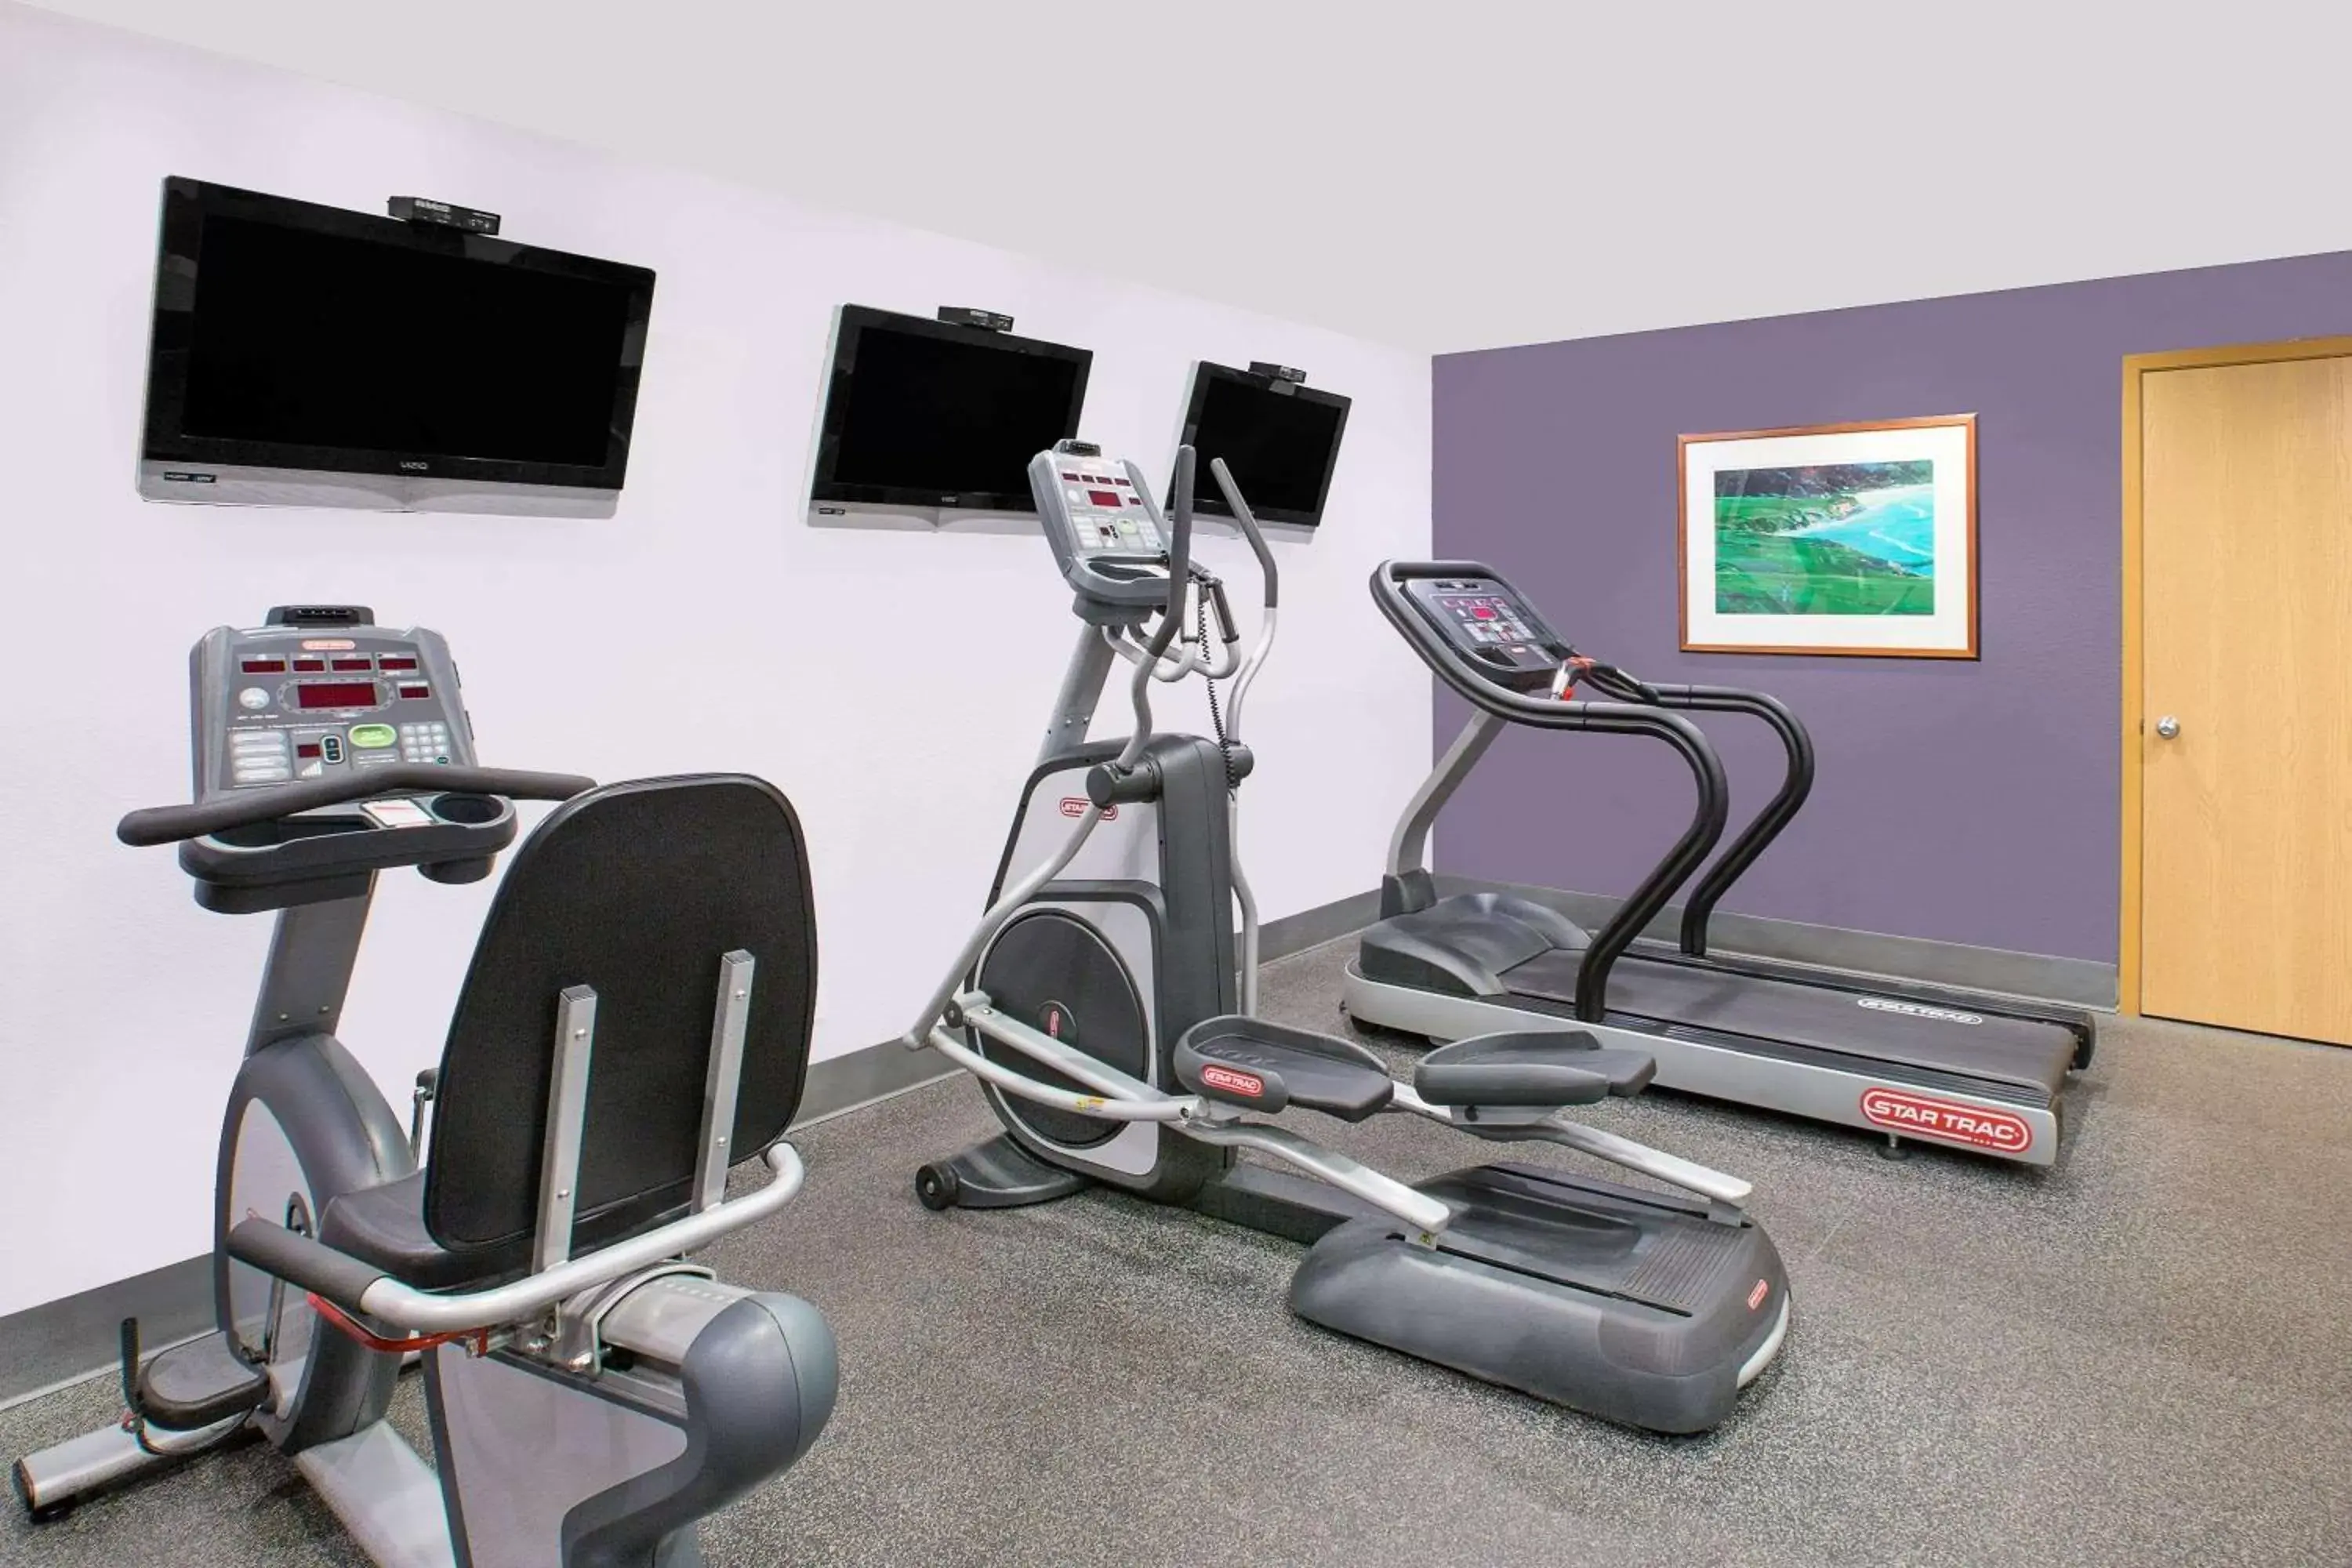 Fitness centre/facilities, Fitness Center/Facilities in MICROTEL Inn and Suites - Ames